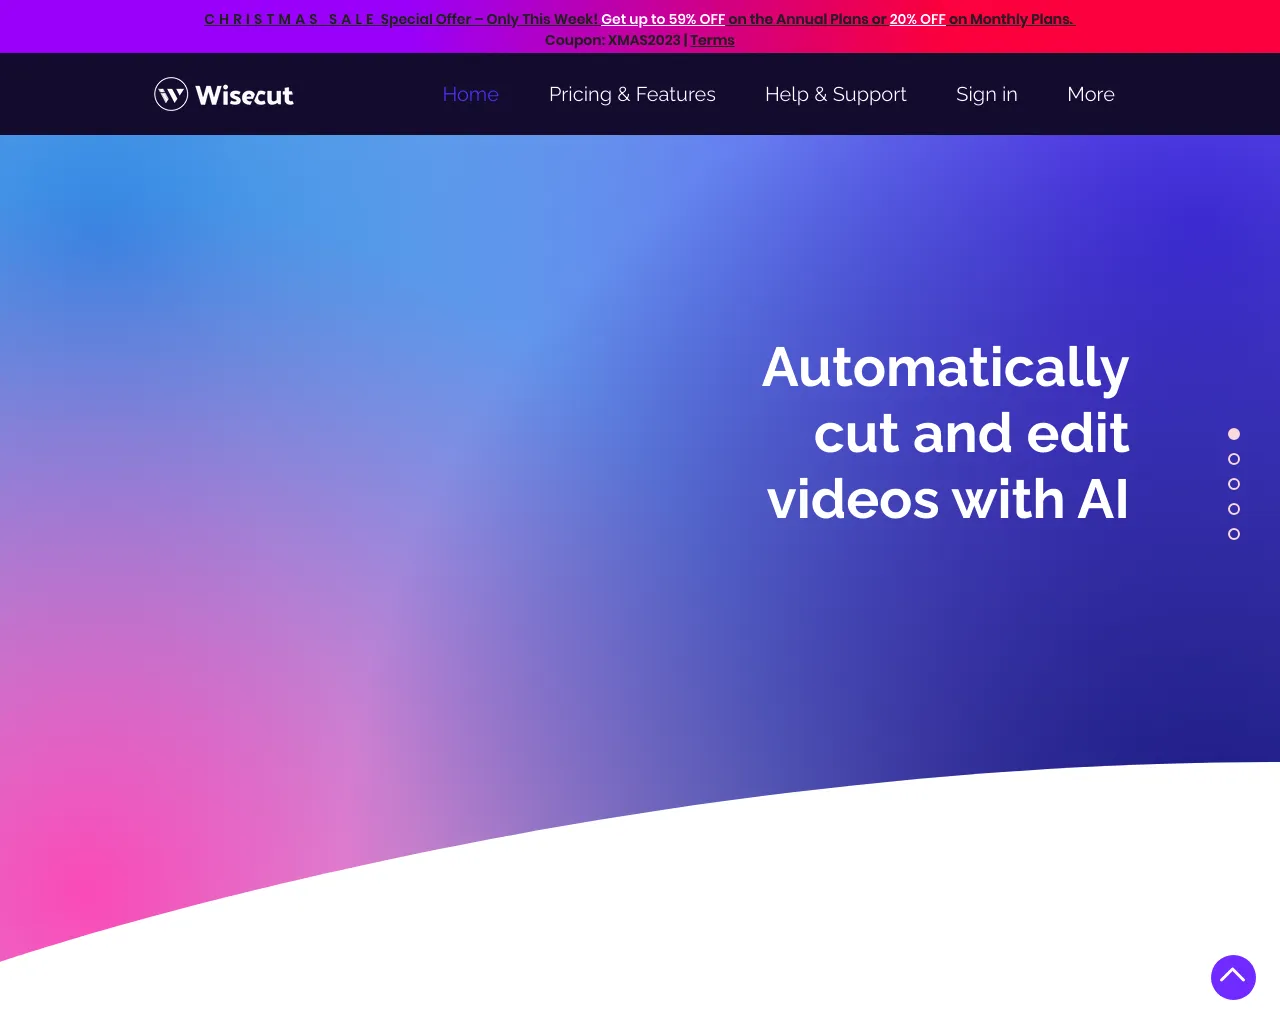 Wisecut - Automatically cut and edit videos with AI